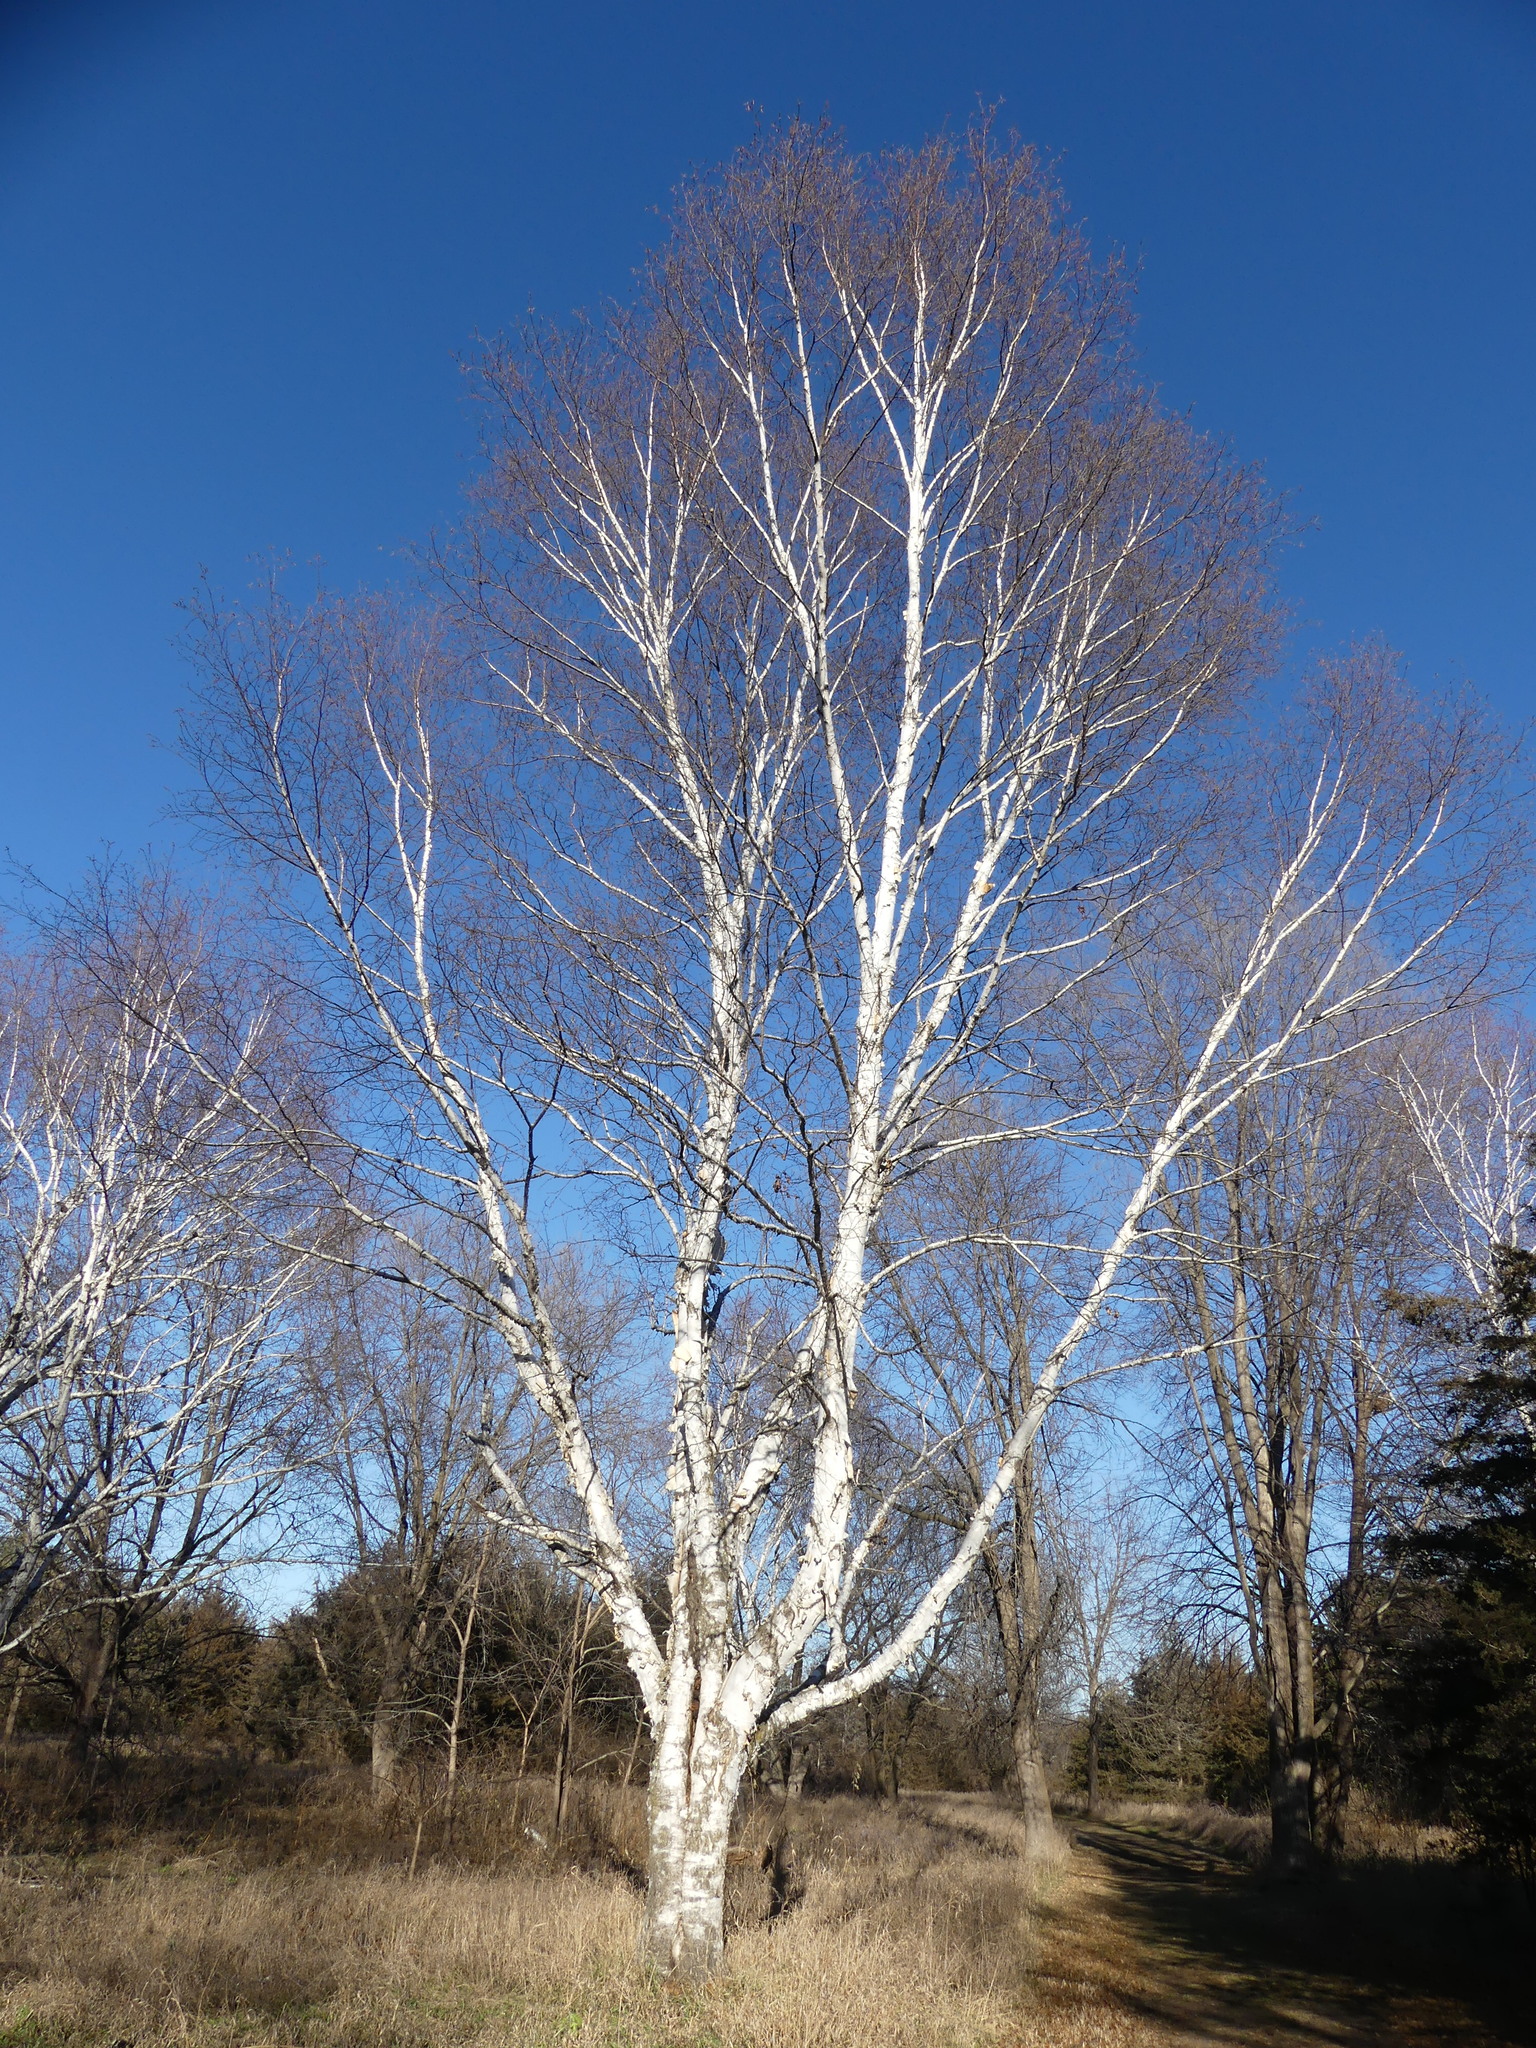 A large paper birch in a partly open woodland. Its leafless white trunk and branches are sunlit in this early winter scene.